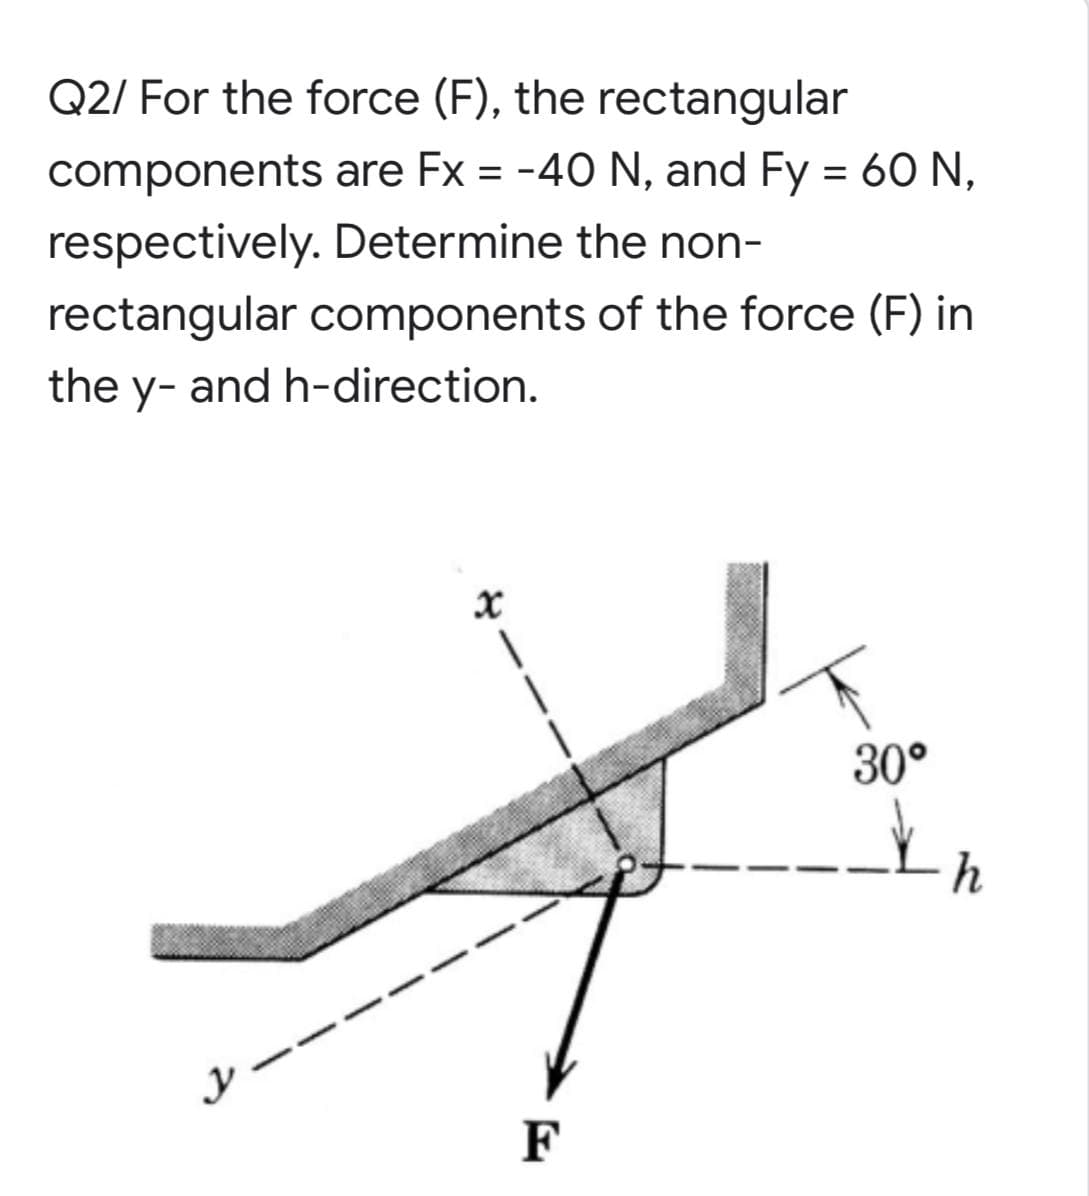 Q2/ For the force (F), the rectangular
components are Fx = -40 N, and Fy = 60 N,
%3D
respectively. Determine the non-
rectangular components of the force (F) in
the y- and h-direction.
30°
h
シー
F
